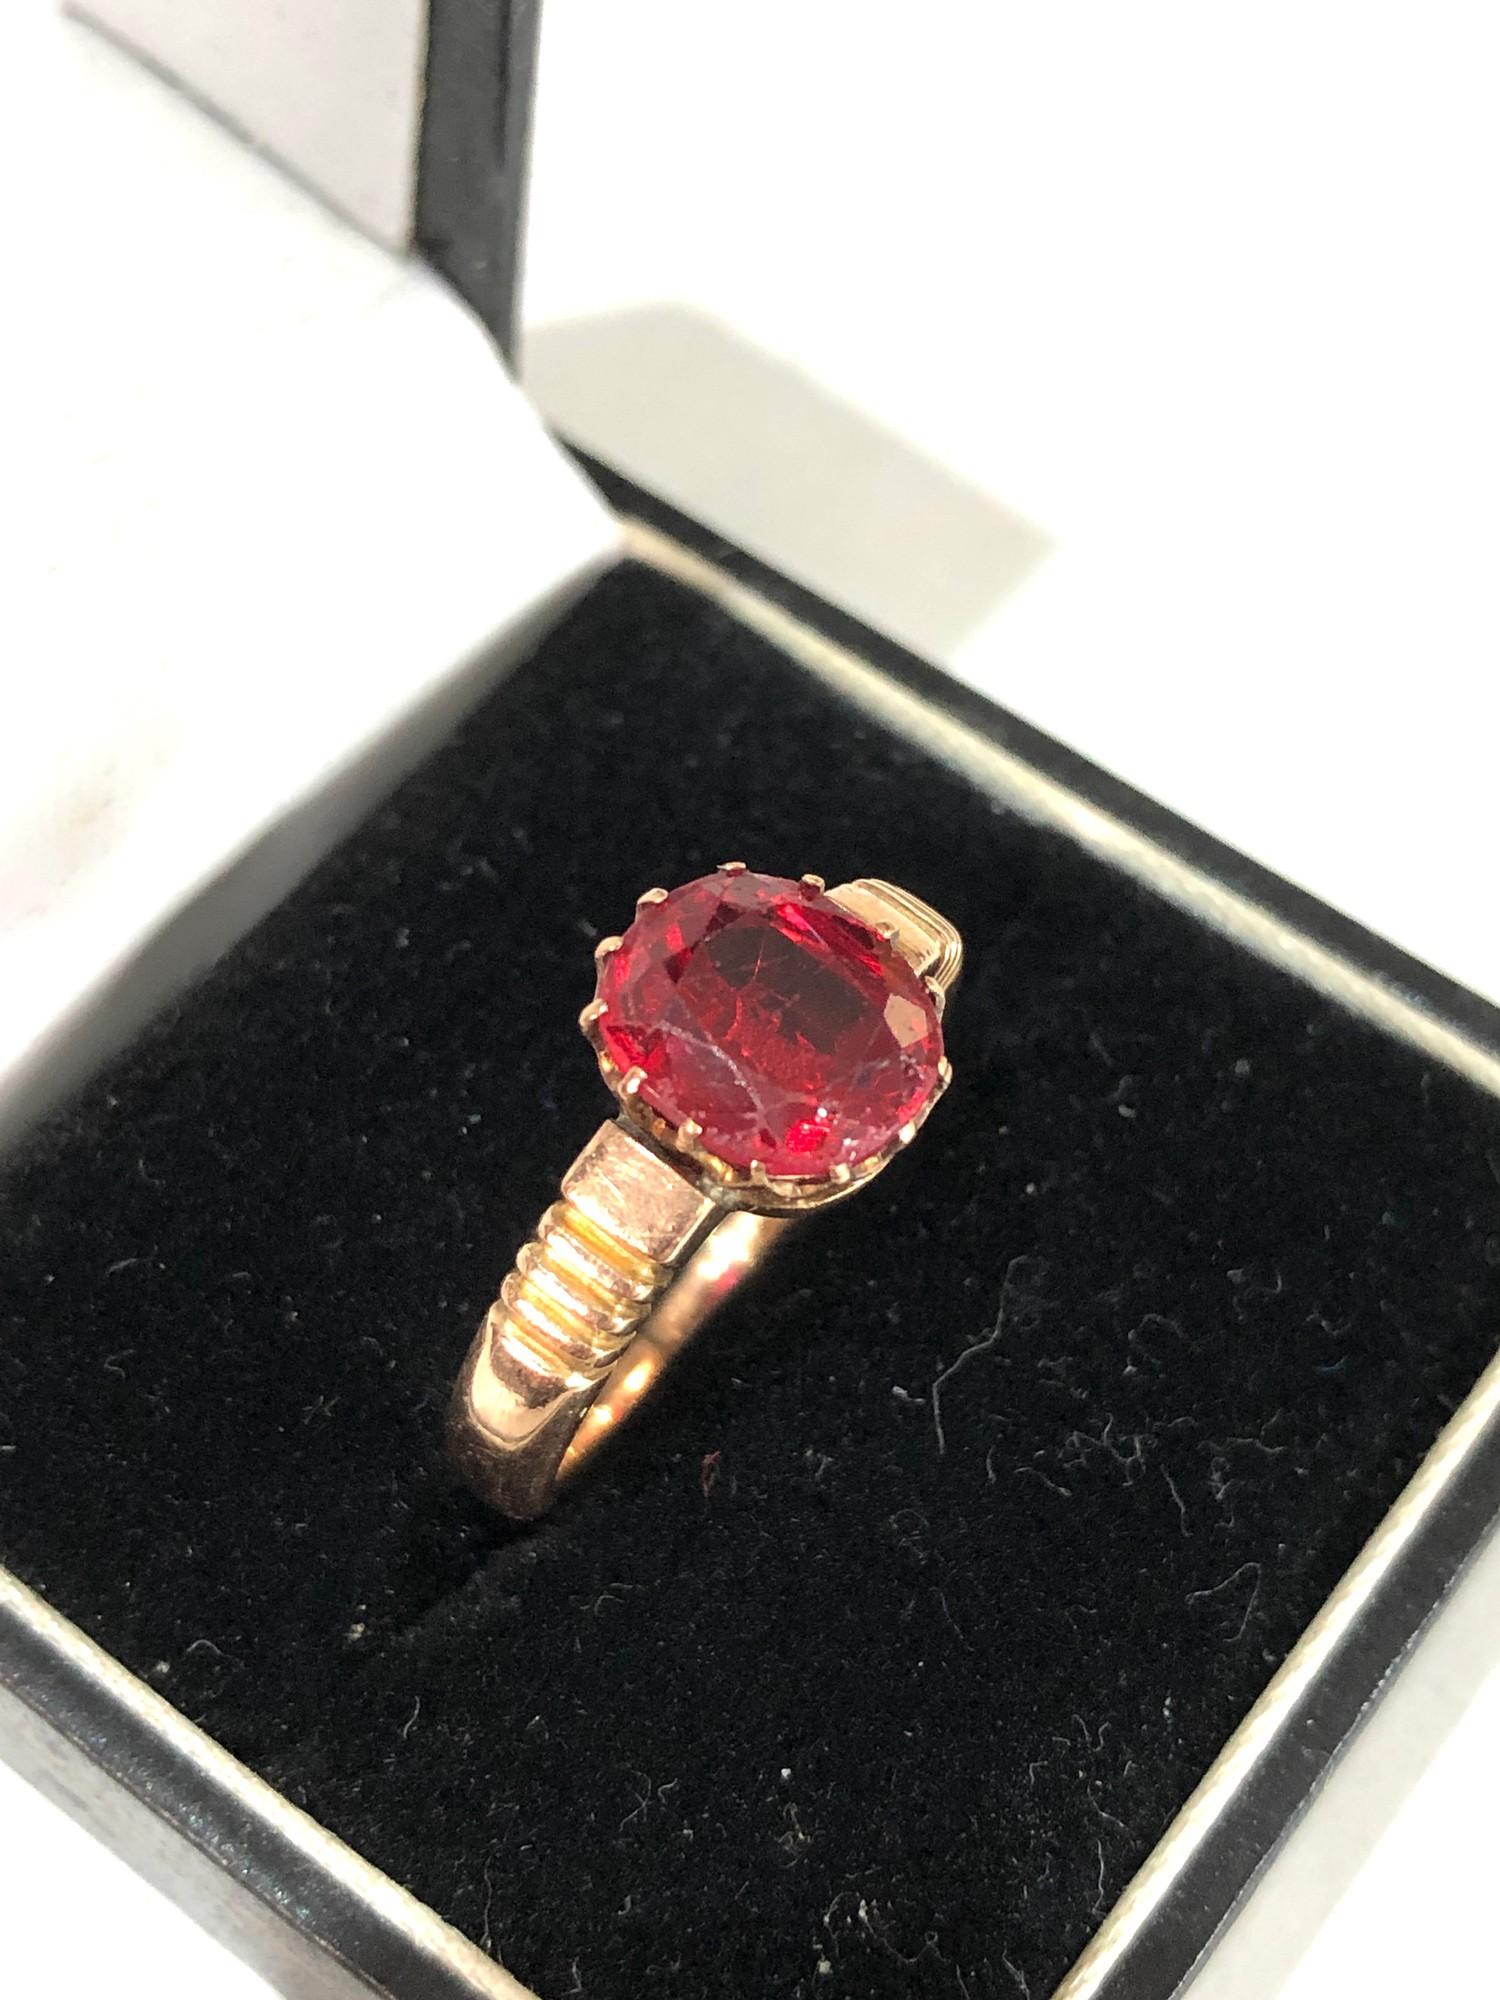 9ct gold garnet antique ring weight 4.2g - Image 2 of 4